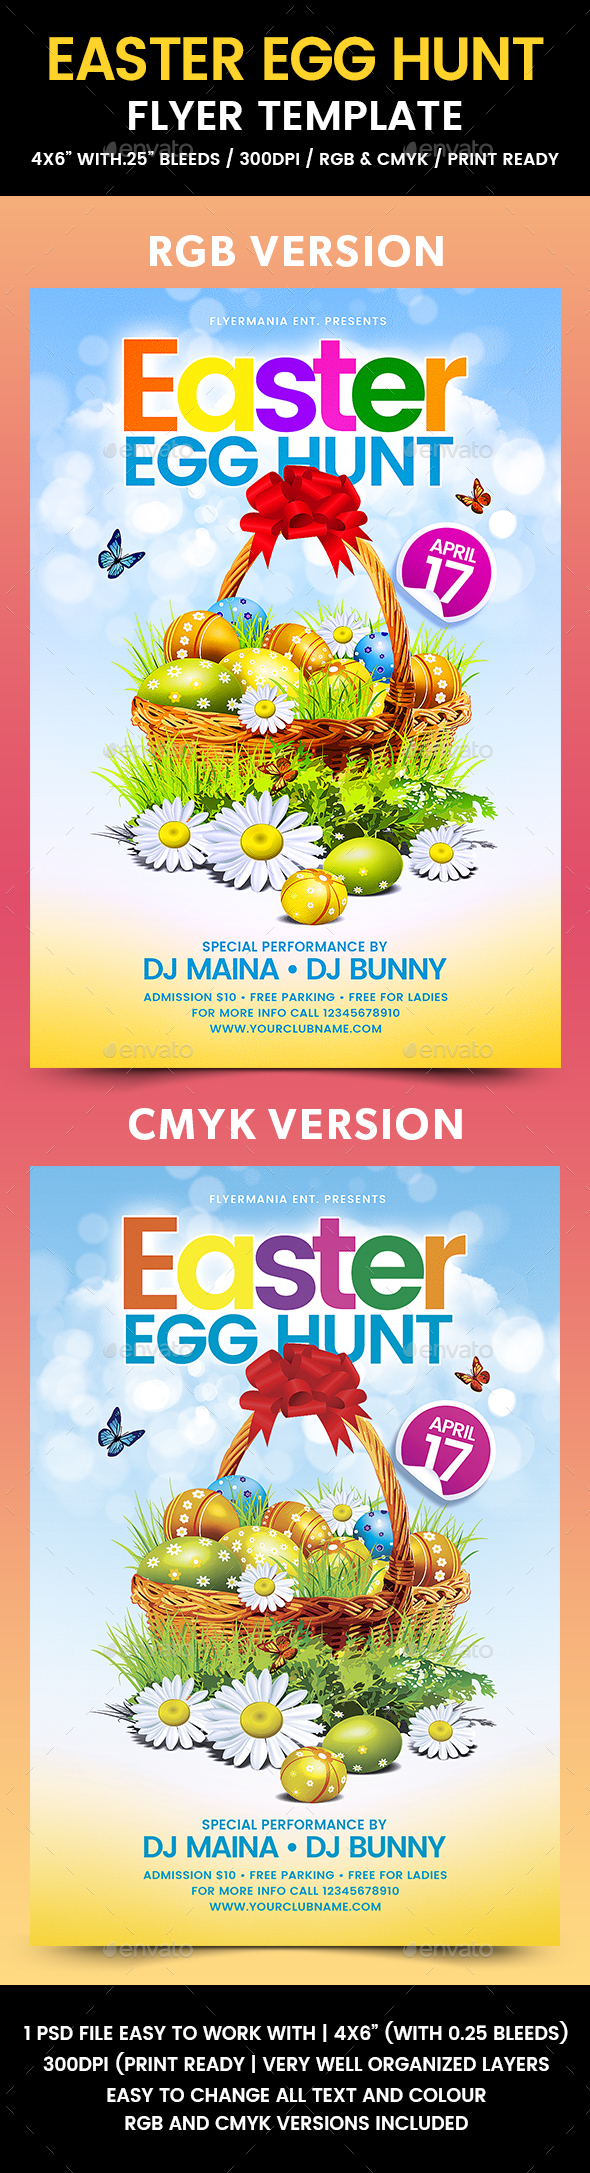 Easter Egg Hunt Flyer Template by Flyermania GraphicRiver